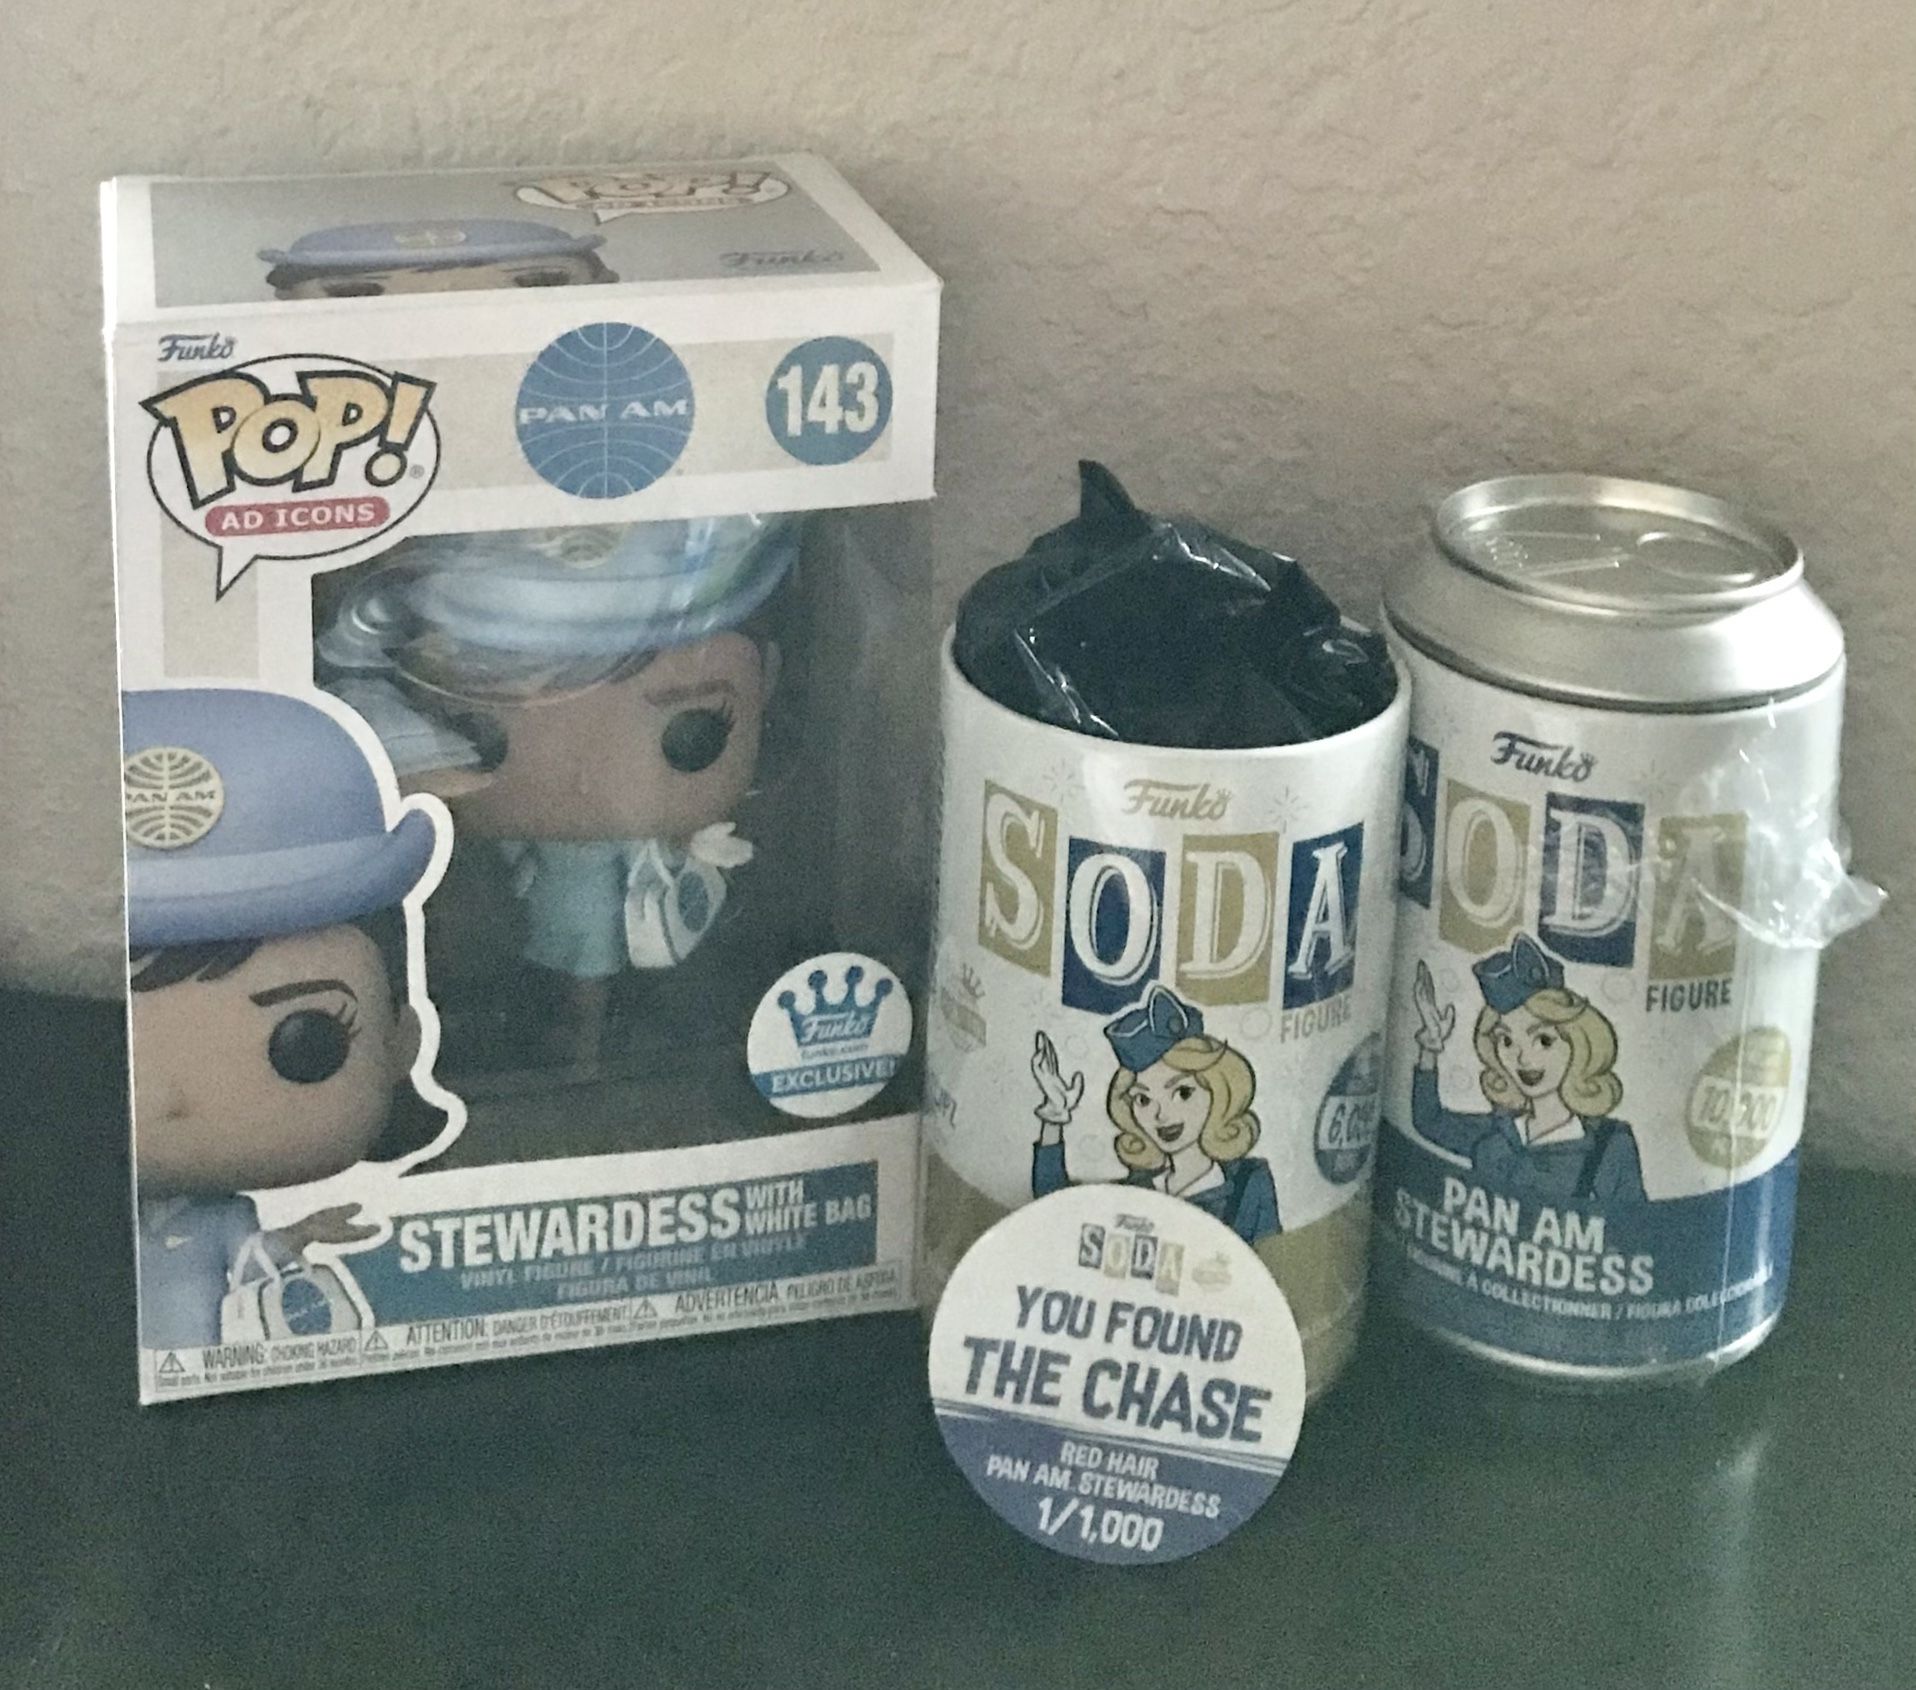 Funko SODA POP! Pan Am Stewardess Chase 1/1000 Red Hair & Common And POP! Stewardess with White Bag Limited Exclusive NEW! Cans are Opened, Bags are S